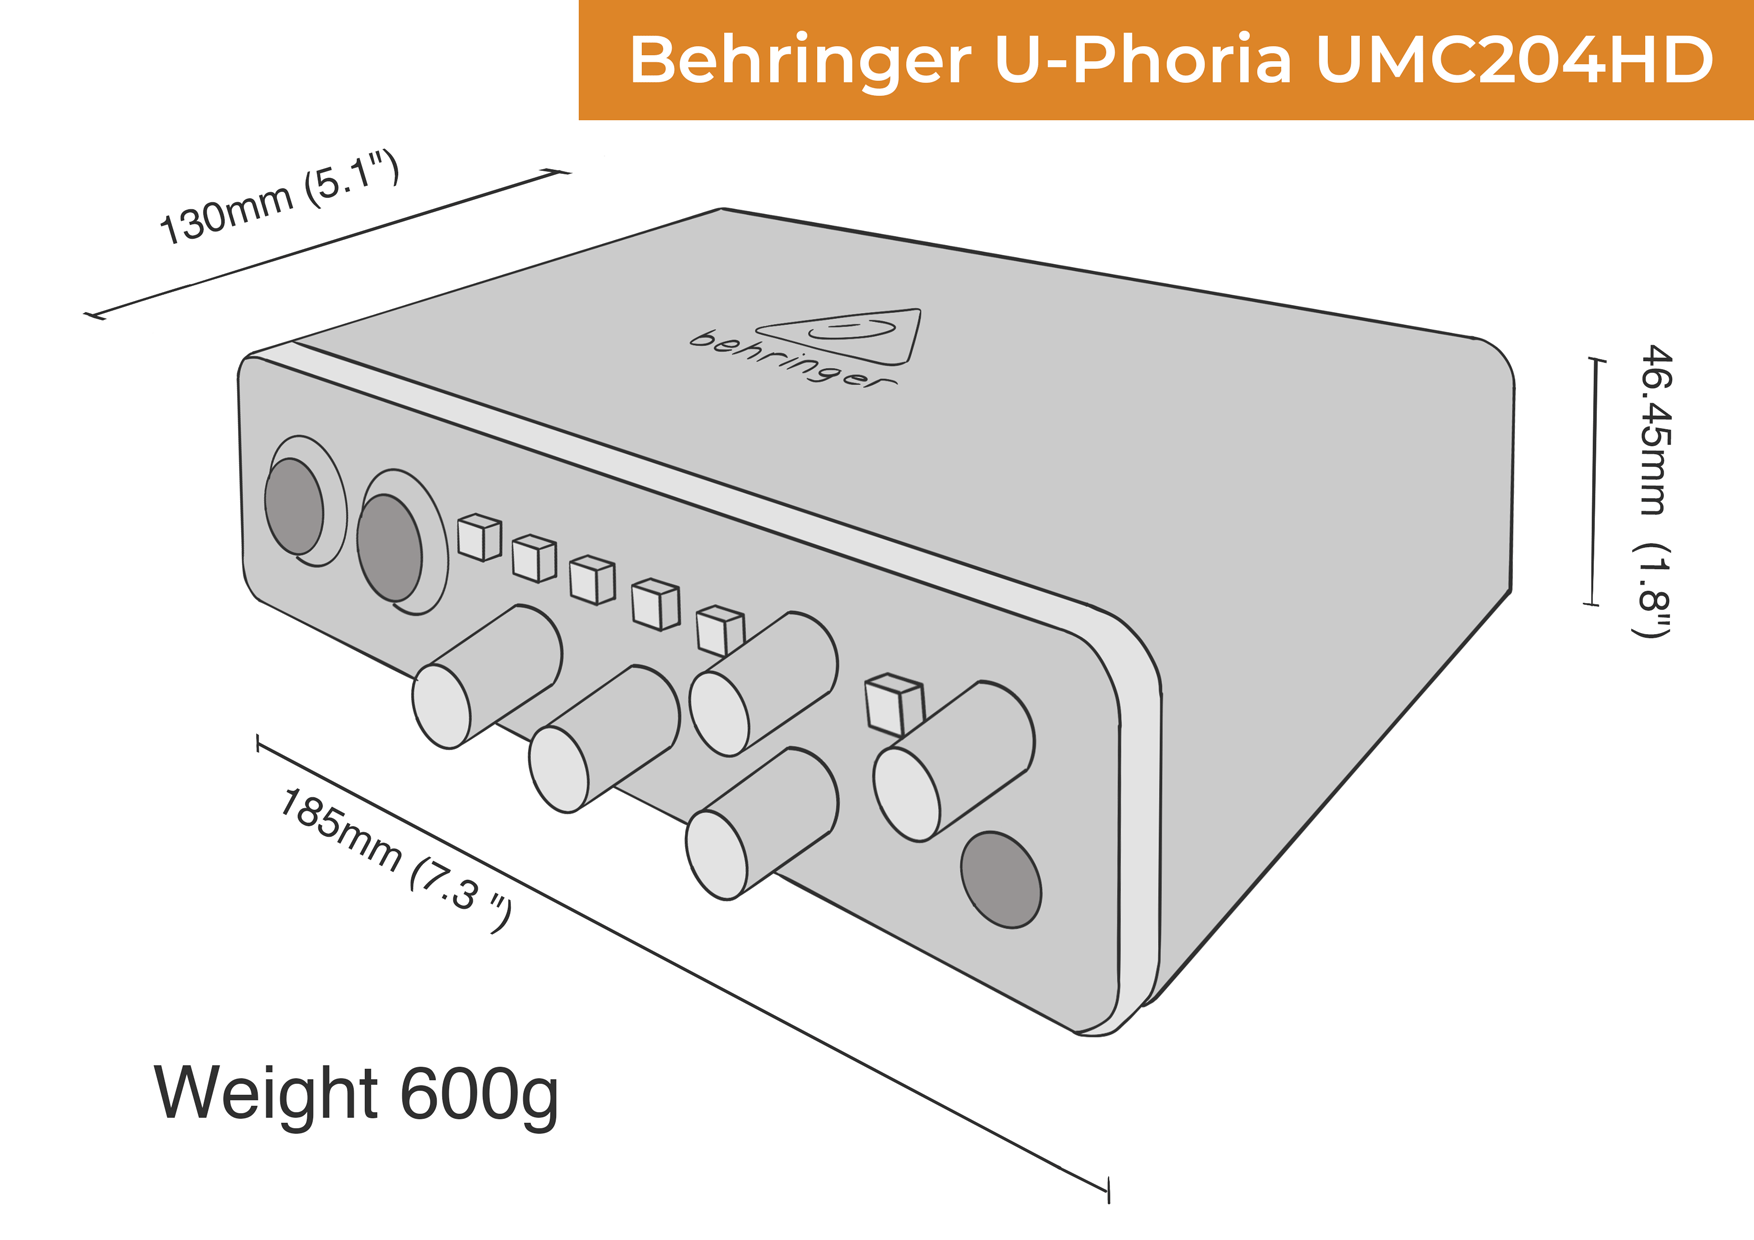 Behringer U-Phoria UMC204HD dimensions and weight